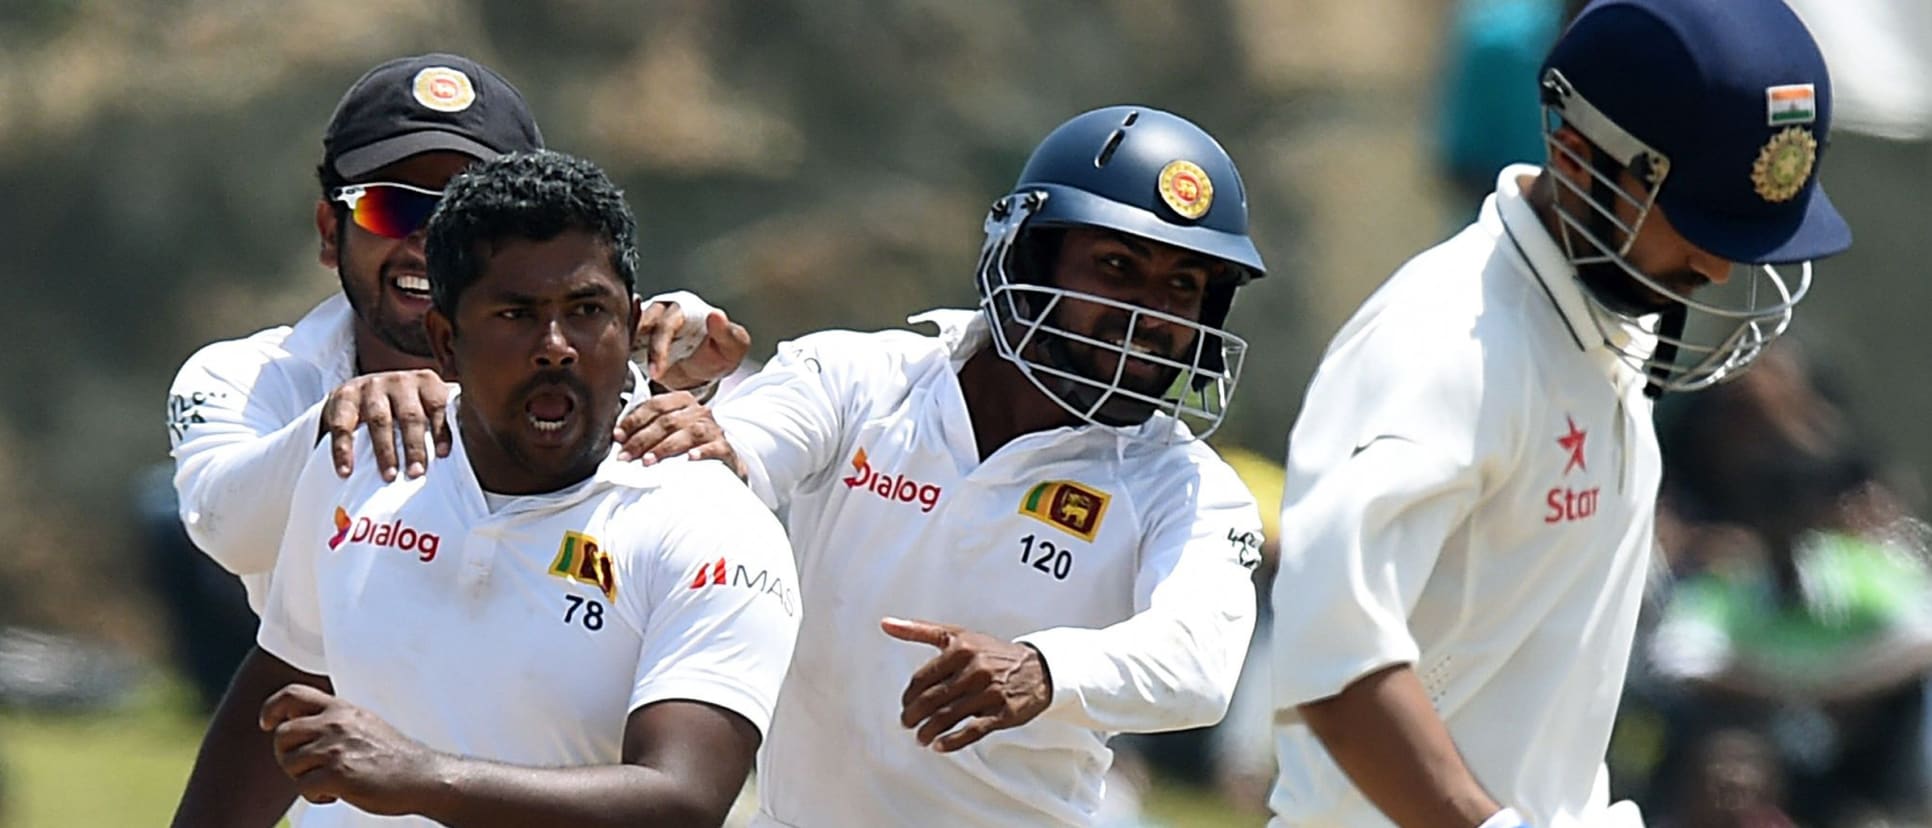 India's batsmen had no answer for Herath's mastery in Galle in 2015